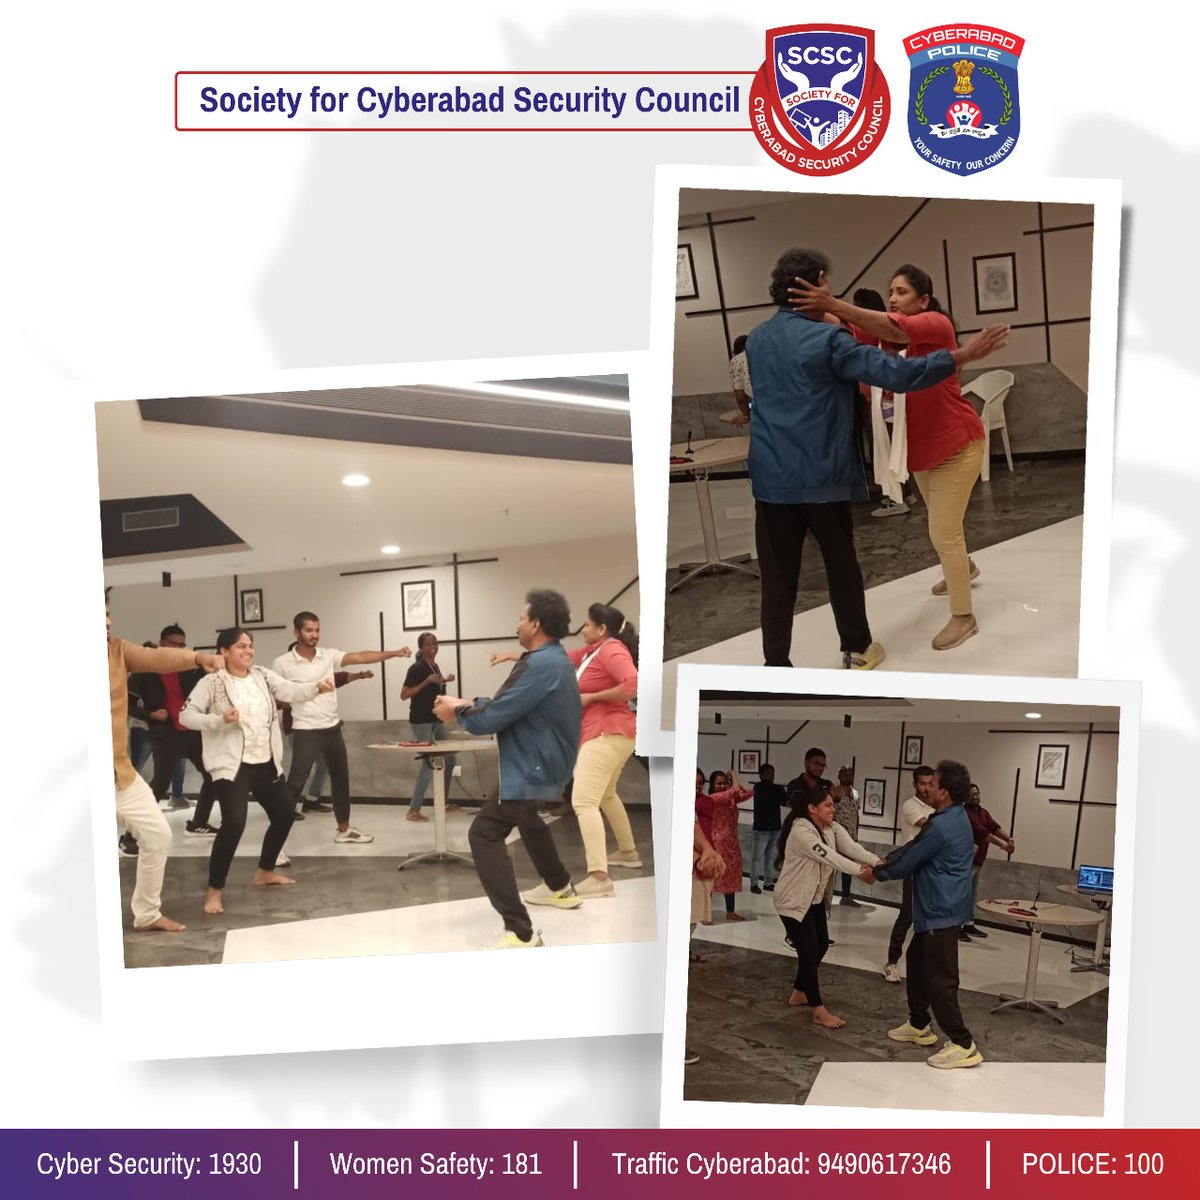 Society for Cyberabad Security Council(SCSC) successfully completed a Self Defence Workshop on Friday evening for Teleperformance. 💪👊

#SelfDefenseTraining #StaySafe #SafetySkills #SelfDefense #PersonalSecurity #empowerment #LearnToDefend #SelfProtection #SCSCEvents #women